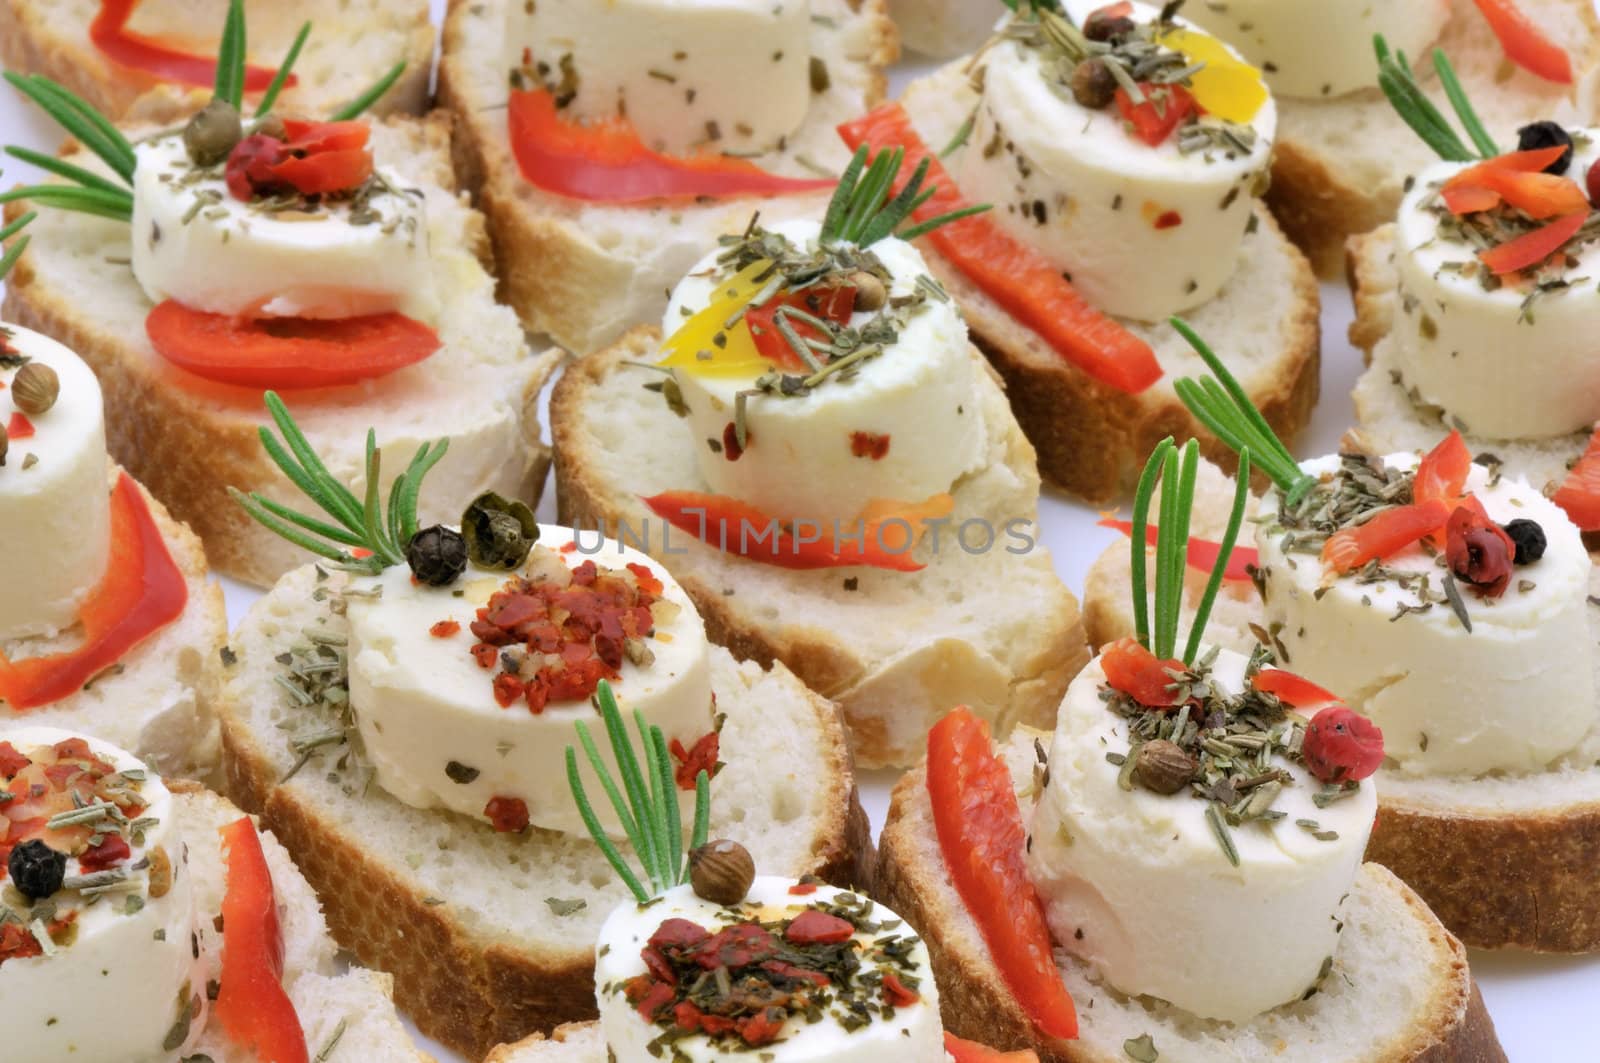 Cheese canape by Hbak